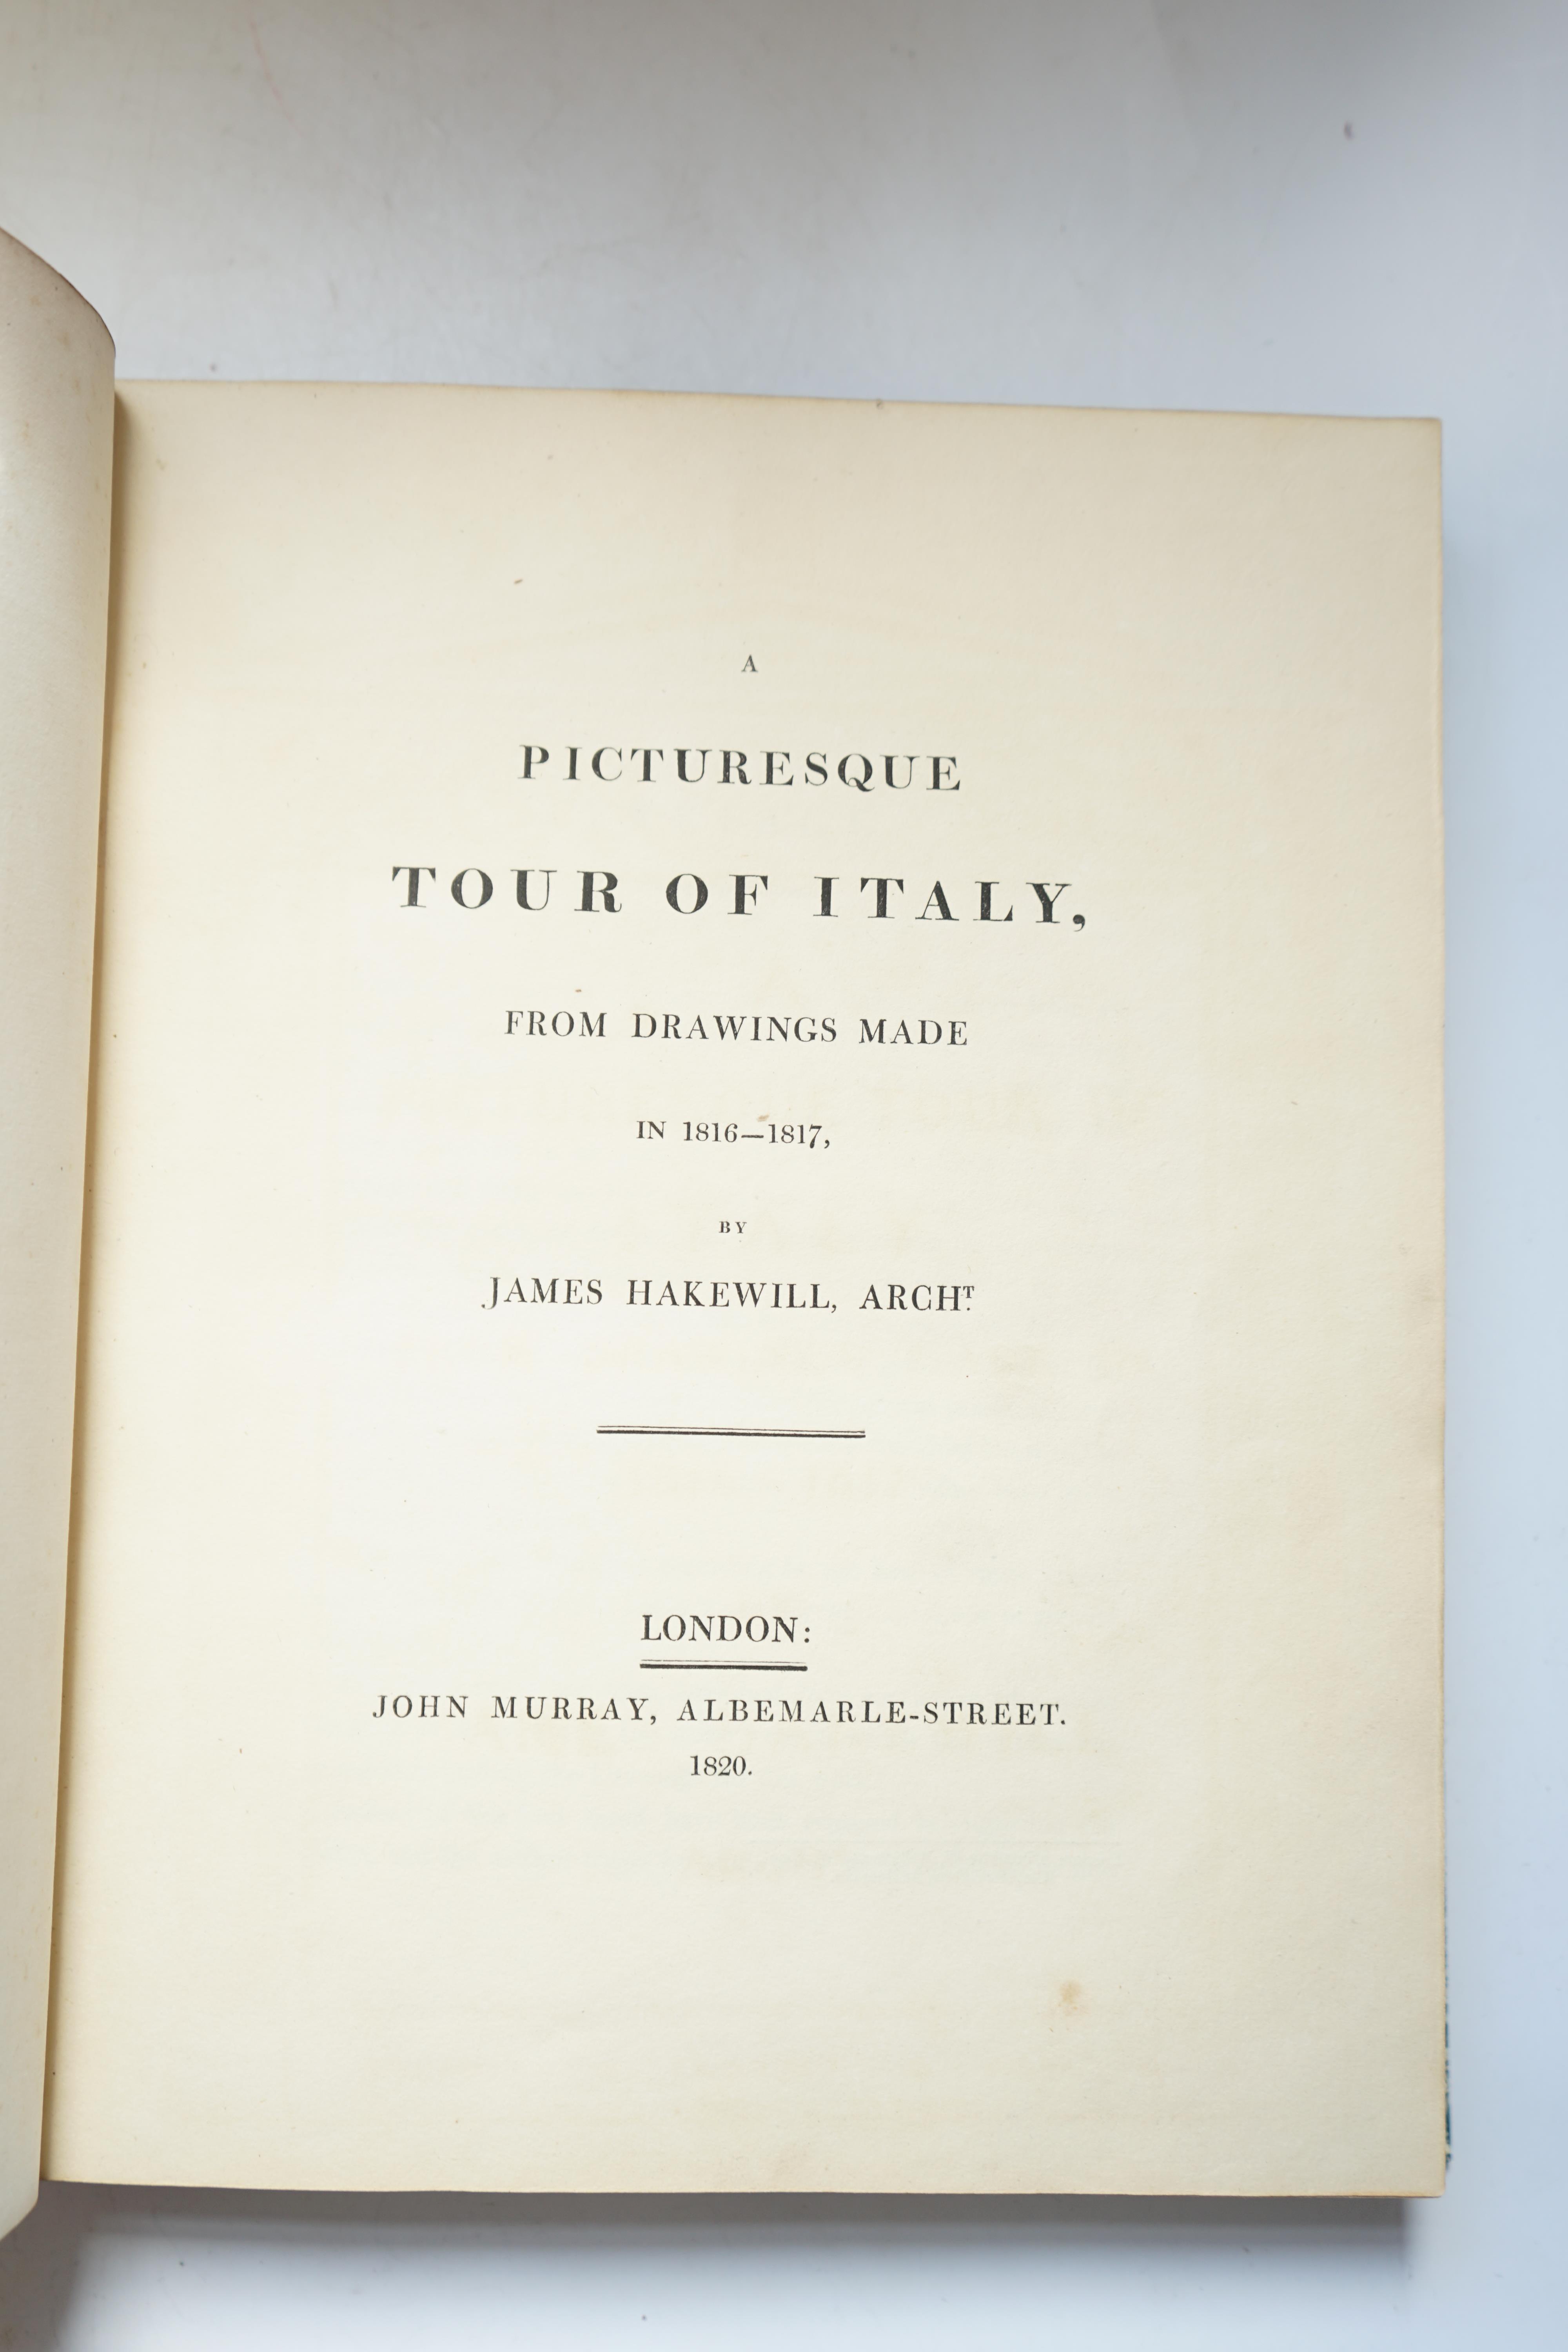 Hakewell, James - A Picturesque Tour of Italy from Drawings made in 1816-1817, 4to, rebound quarter morocco with marbled boards, with half title, additional engraved title and 63 plates, John Murray, London, 1820.